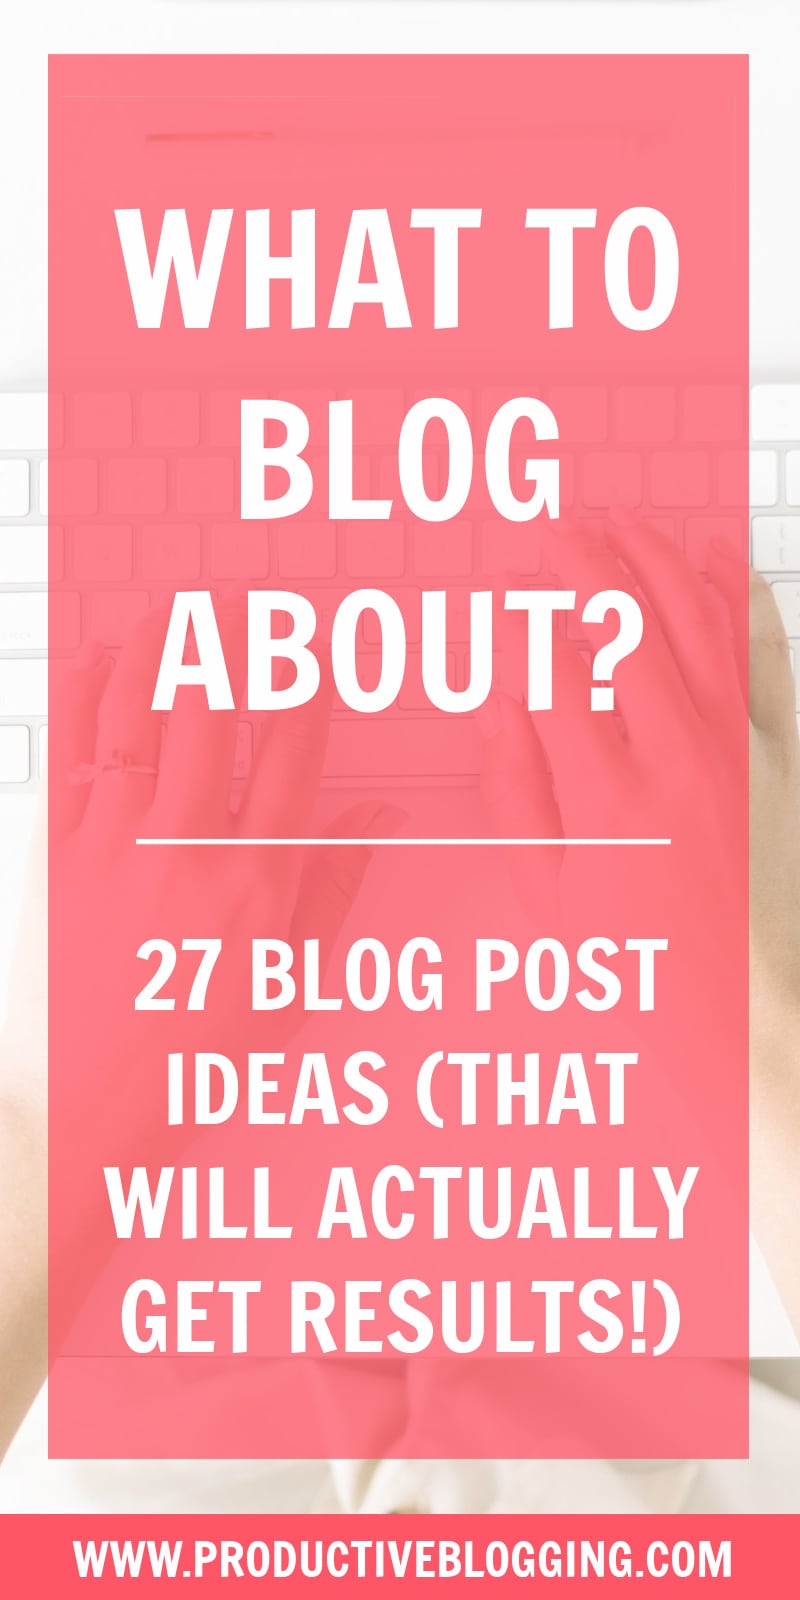 Staring at a blinking cursor? Stuck on what to write about? Here are 27 blog post ideas to inspire you (and which will actually get you results!) #blogpostideas #whattoblogabout #bloggersblock #writersblock #resultsdrivenblogging #blogideas #postideas #blogginglife #bloglife #contentmarketing #blogging #blogger #professionalblogger #bloggingismyjob #solopreneur #mompreneur #fempreneur #makemoneyblogging #bloggingbiz #bloggingtips #blogsmarternotharder #productiveblogging